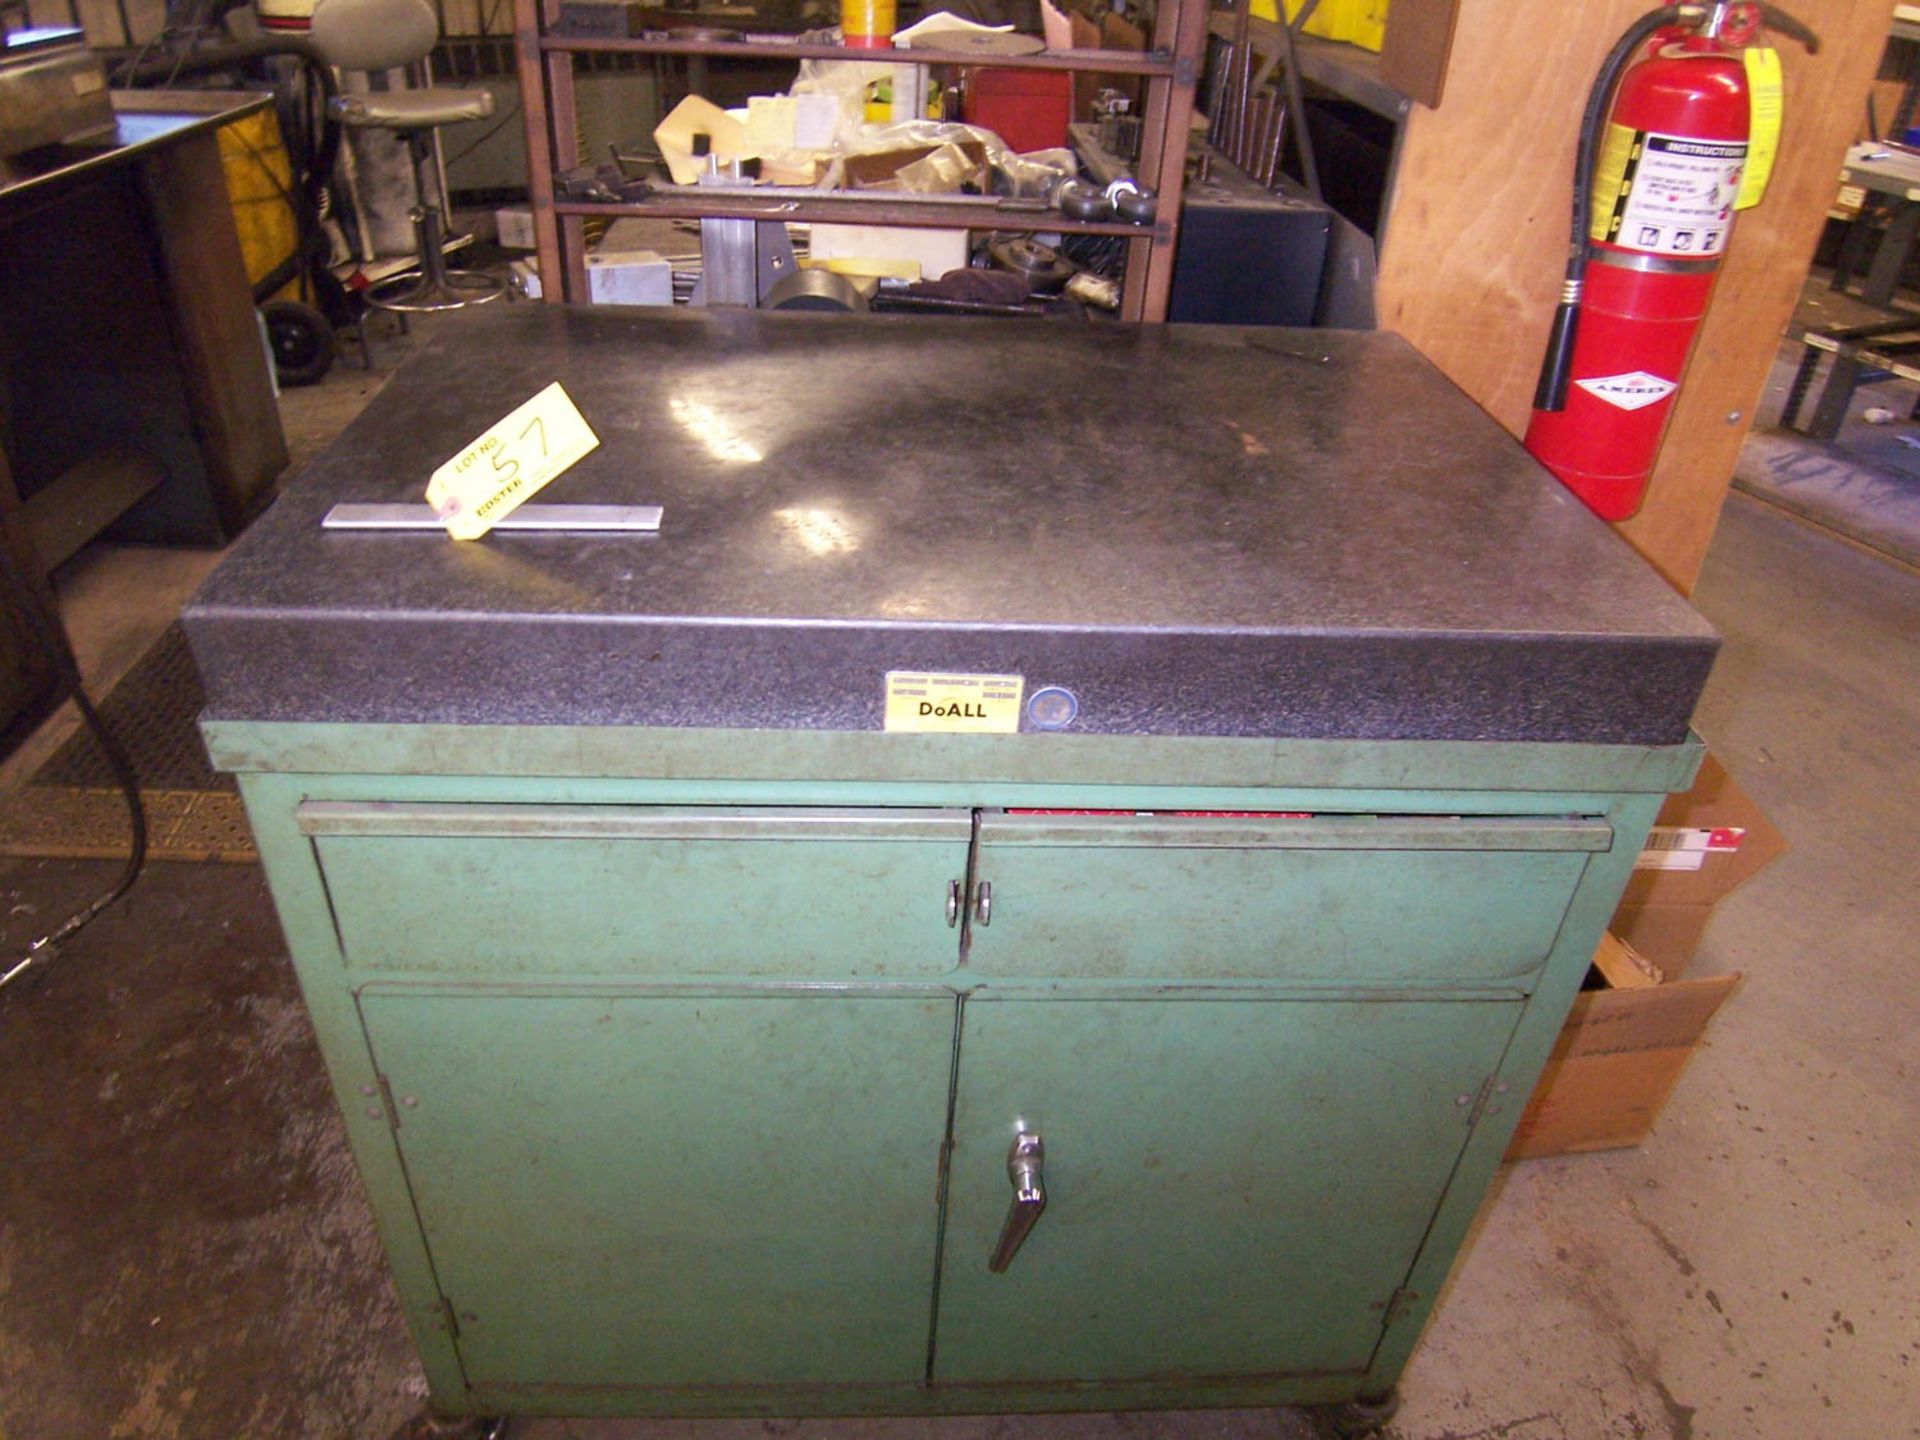 24" X 36" DoALL GRANITE SURFACE PLATE, WITH ROLLING STORAGE CABINET